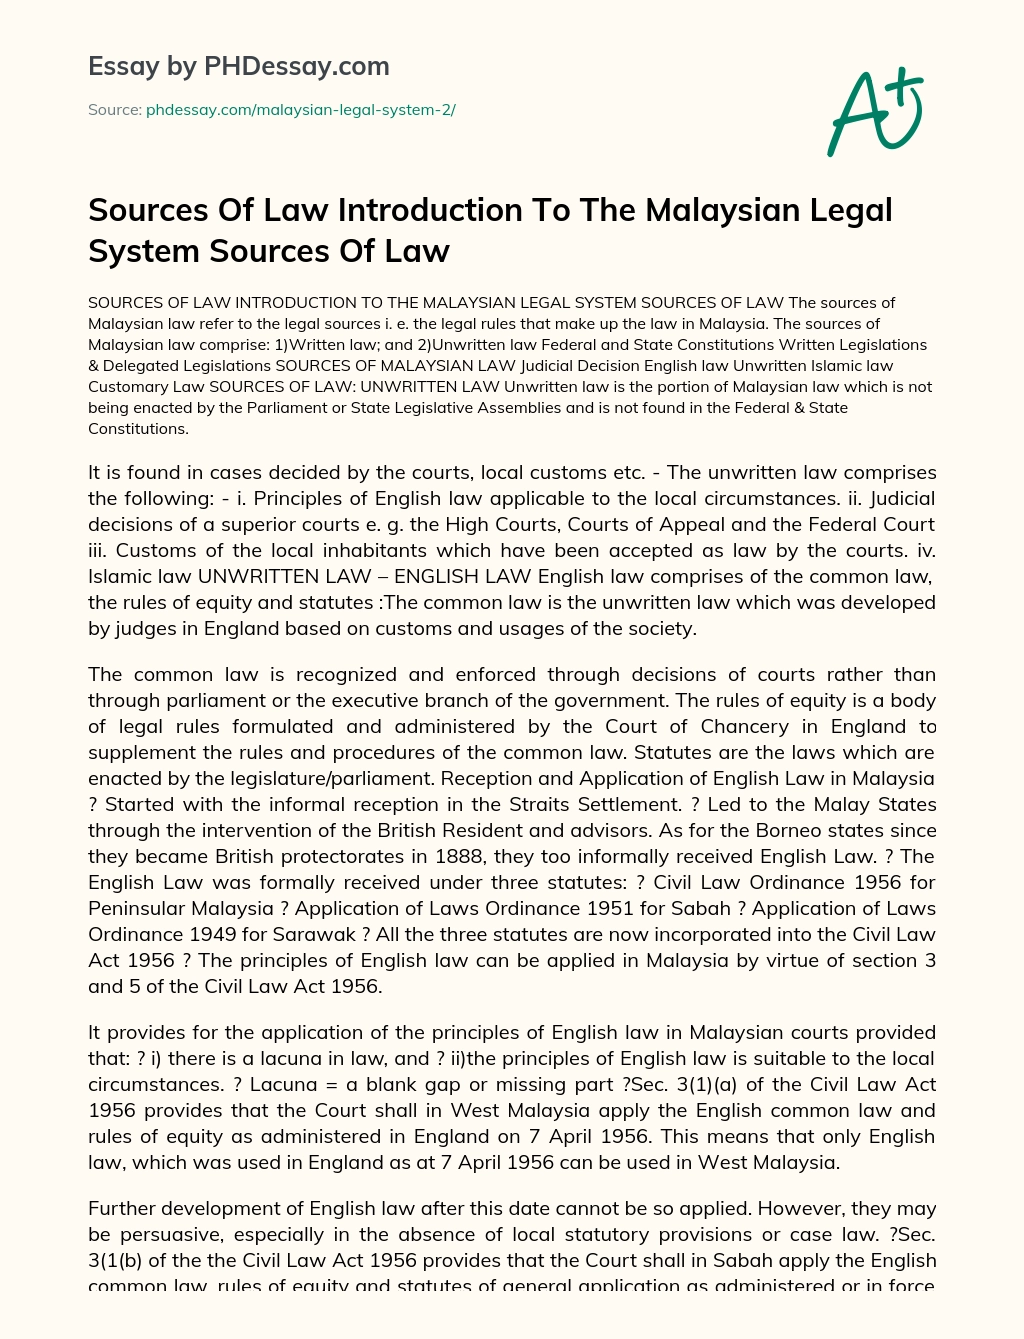 Sources Of Law Introduction To The Malaysian Legal System Sources Of Law essay